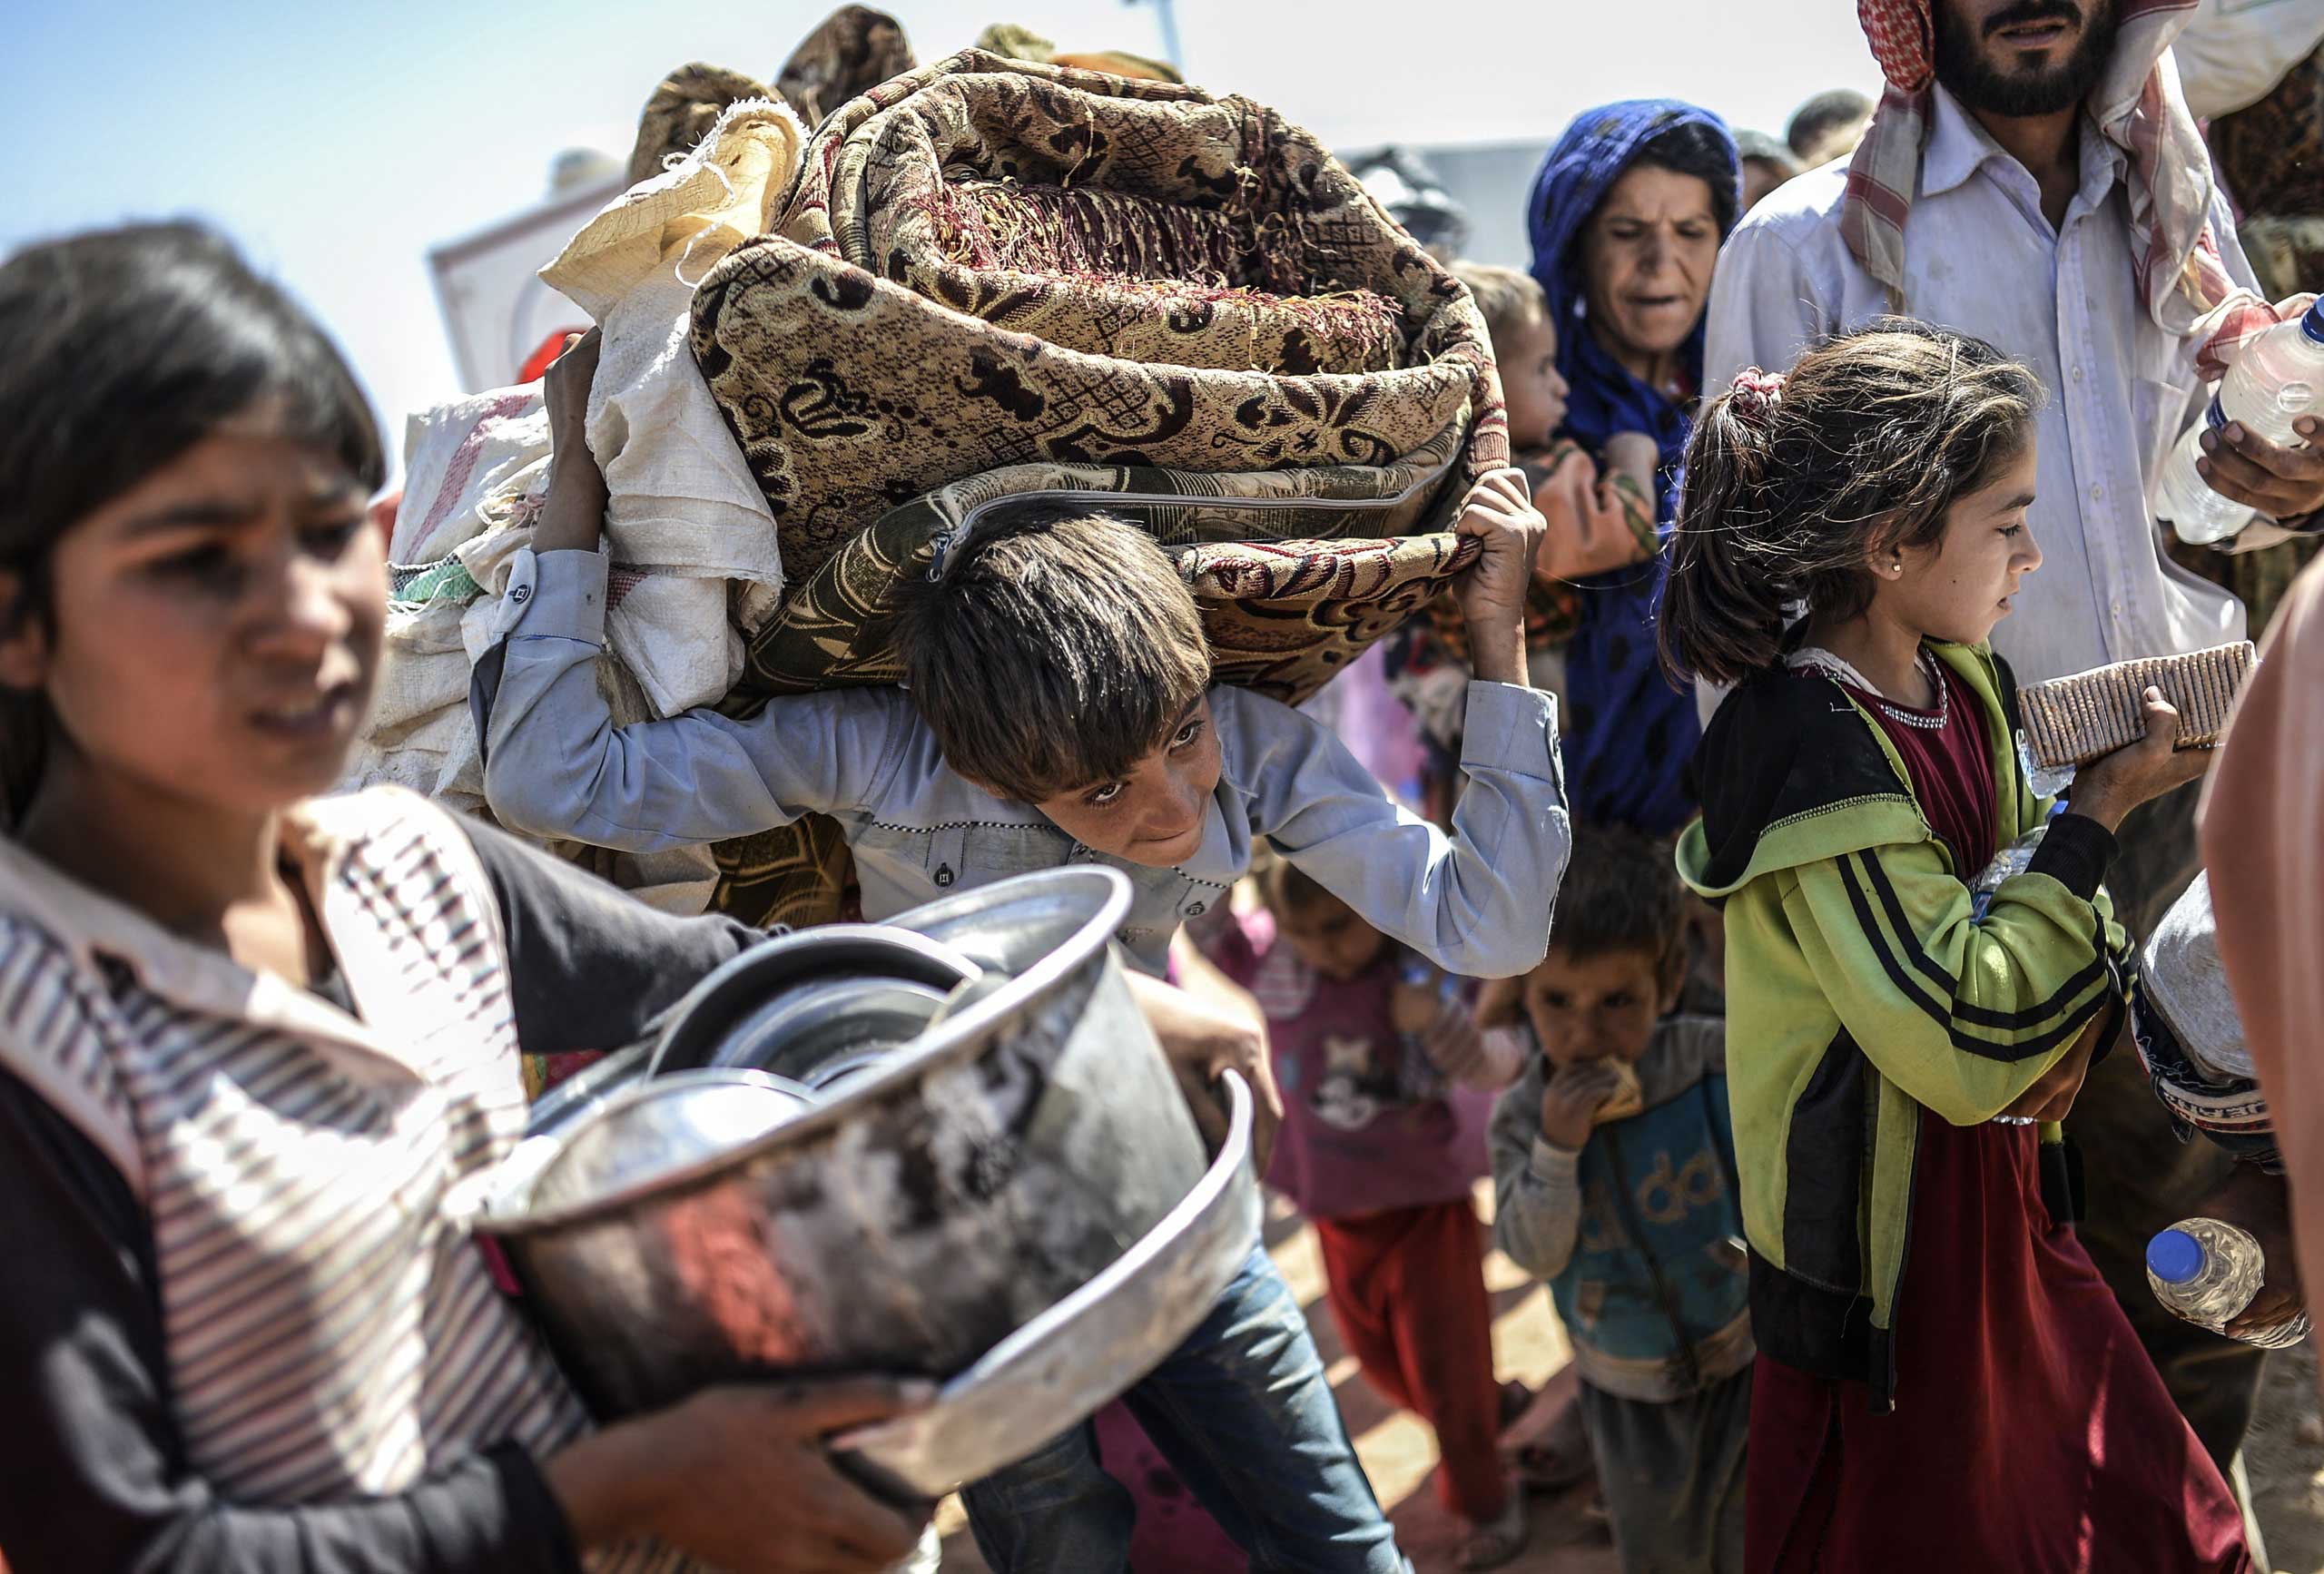 Syrian Kurds carry their belongings as they cross the border between Syria and Turkey at the southeastern town of Suruc in Sanliurfa province on Sept. 23, 2014.